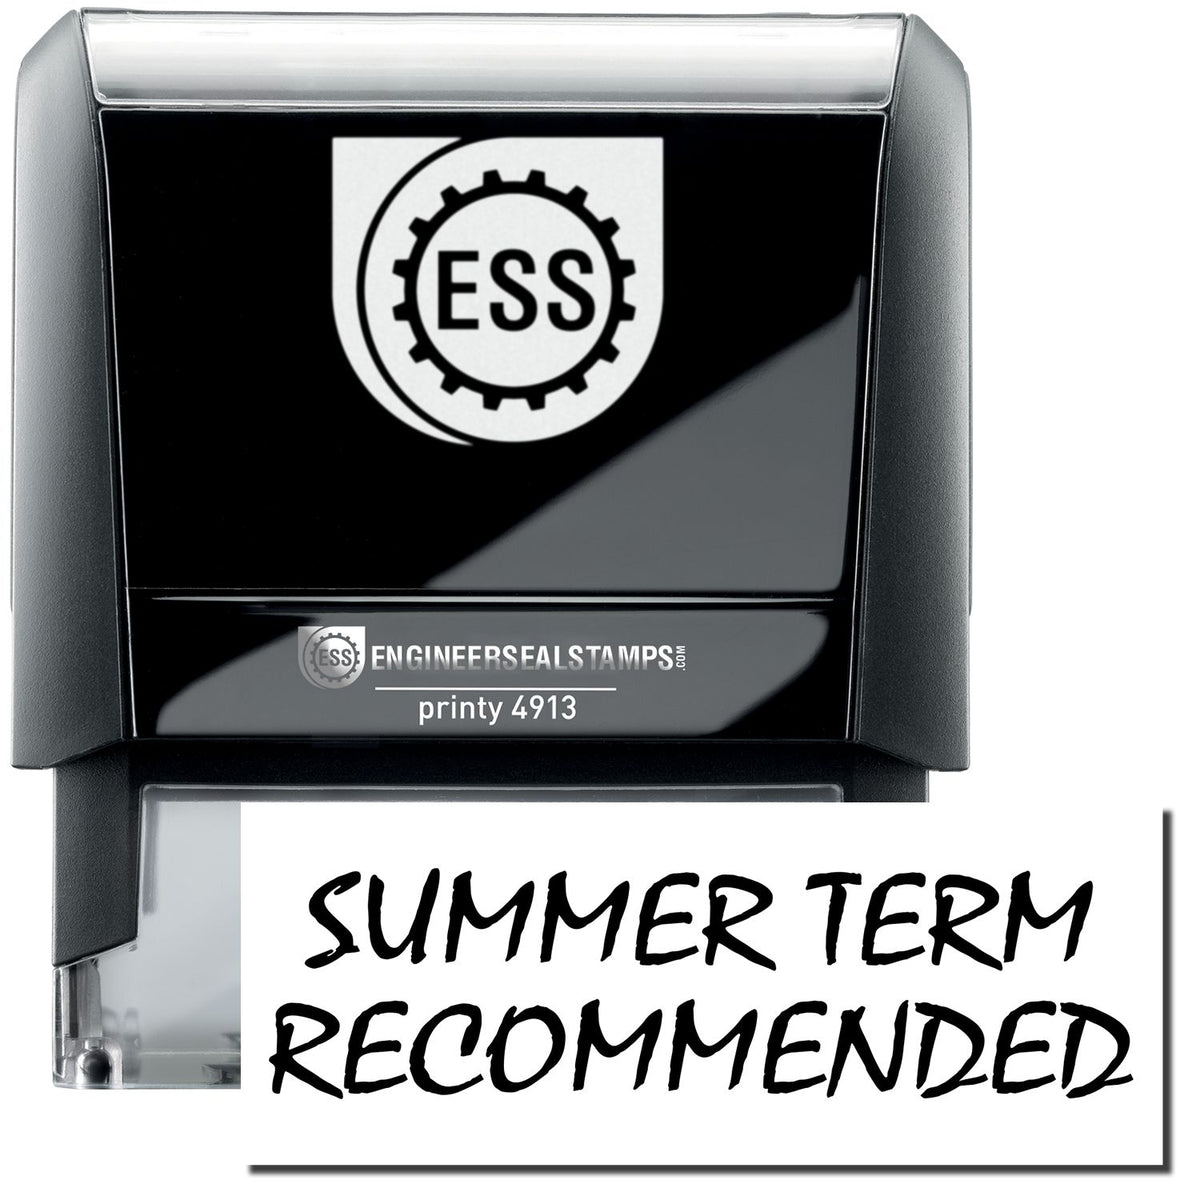 A self-inking stamp with a stamped image showing how the text &quot;SUMMER TERM RECOMMENDED&quot; in a large bold font is displayed by it.